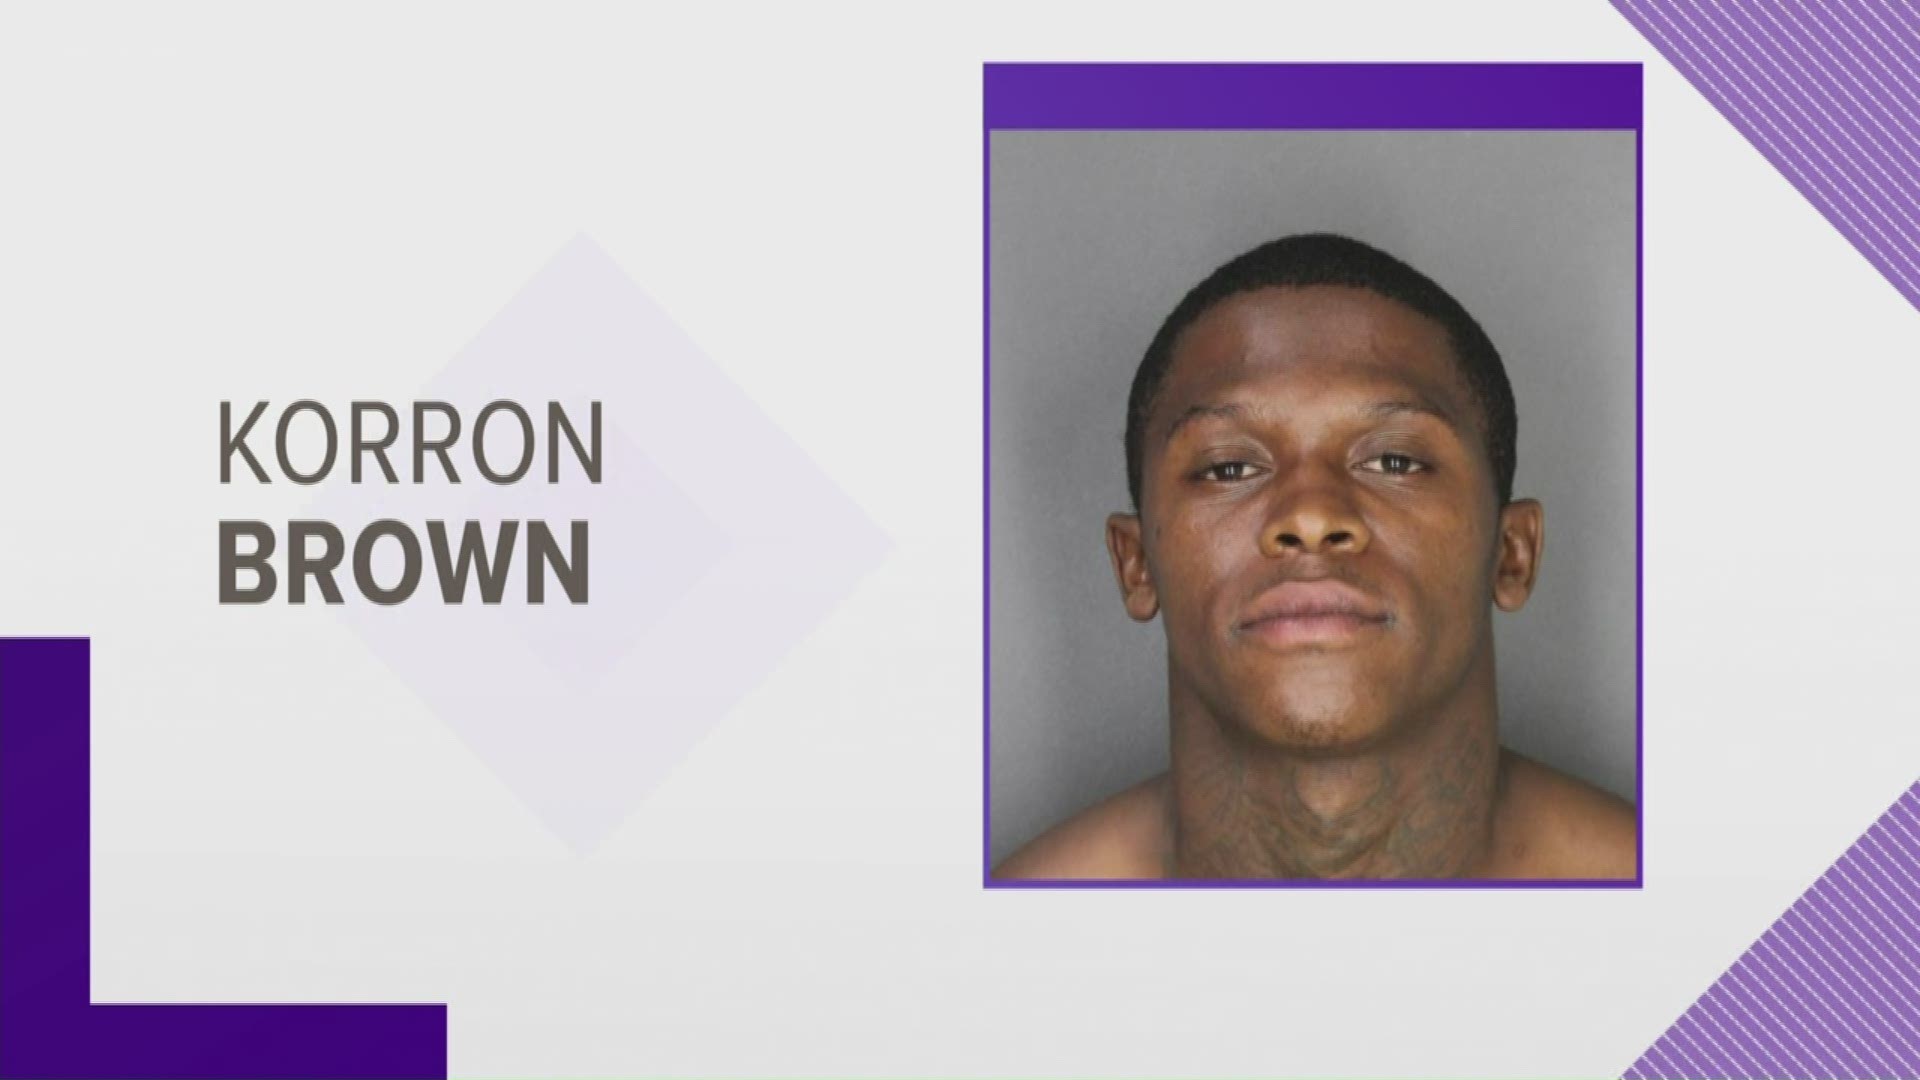 23-year-old Korron Brown is charged with attempted murder and weapon possession.